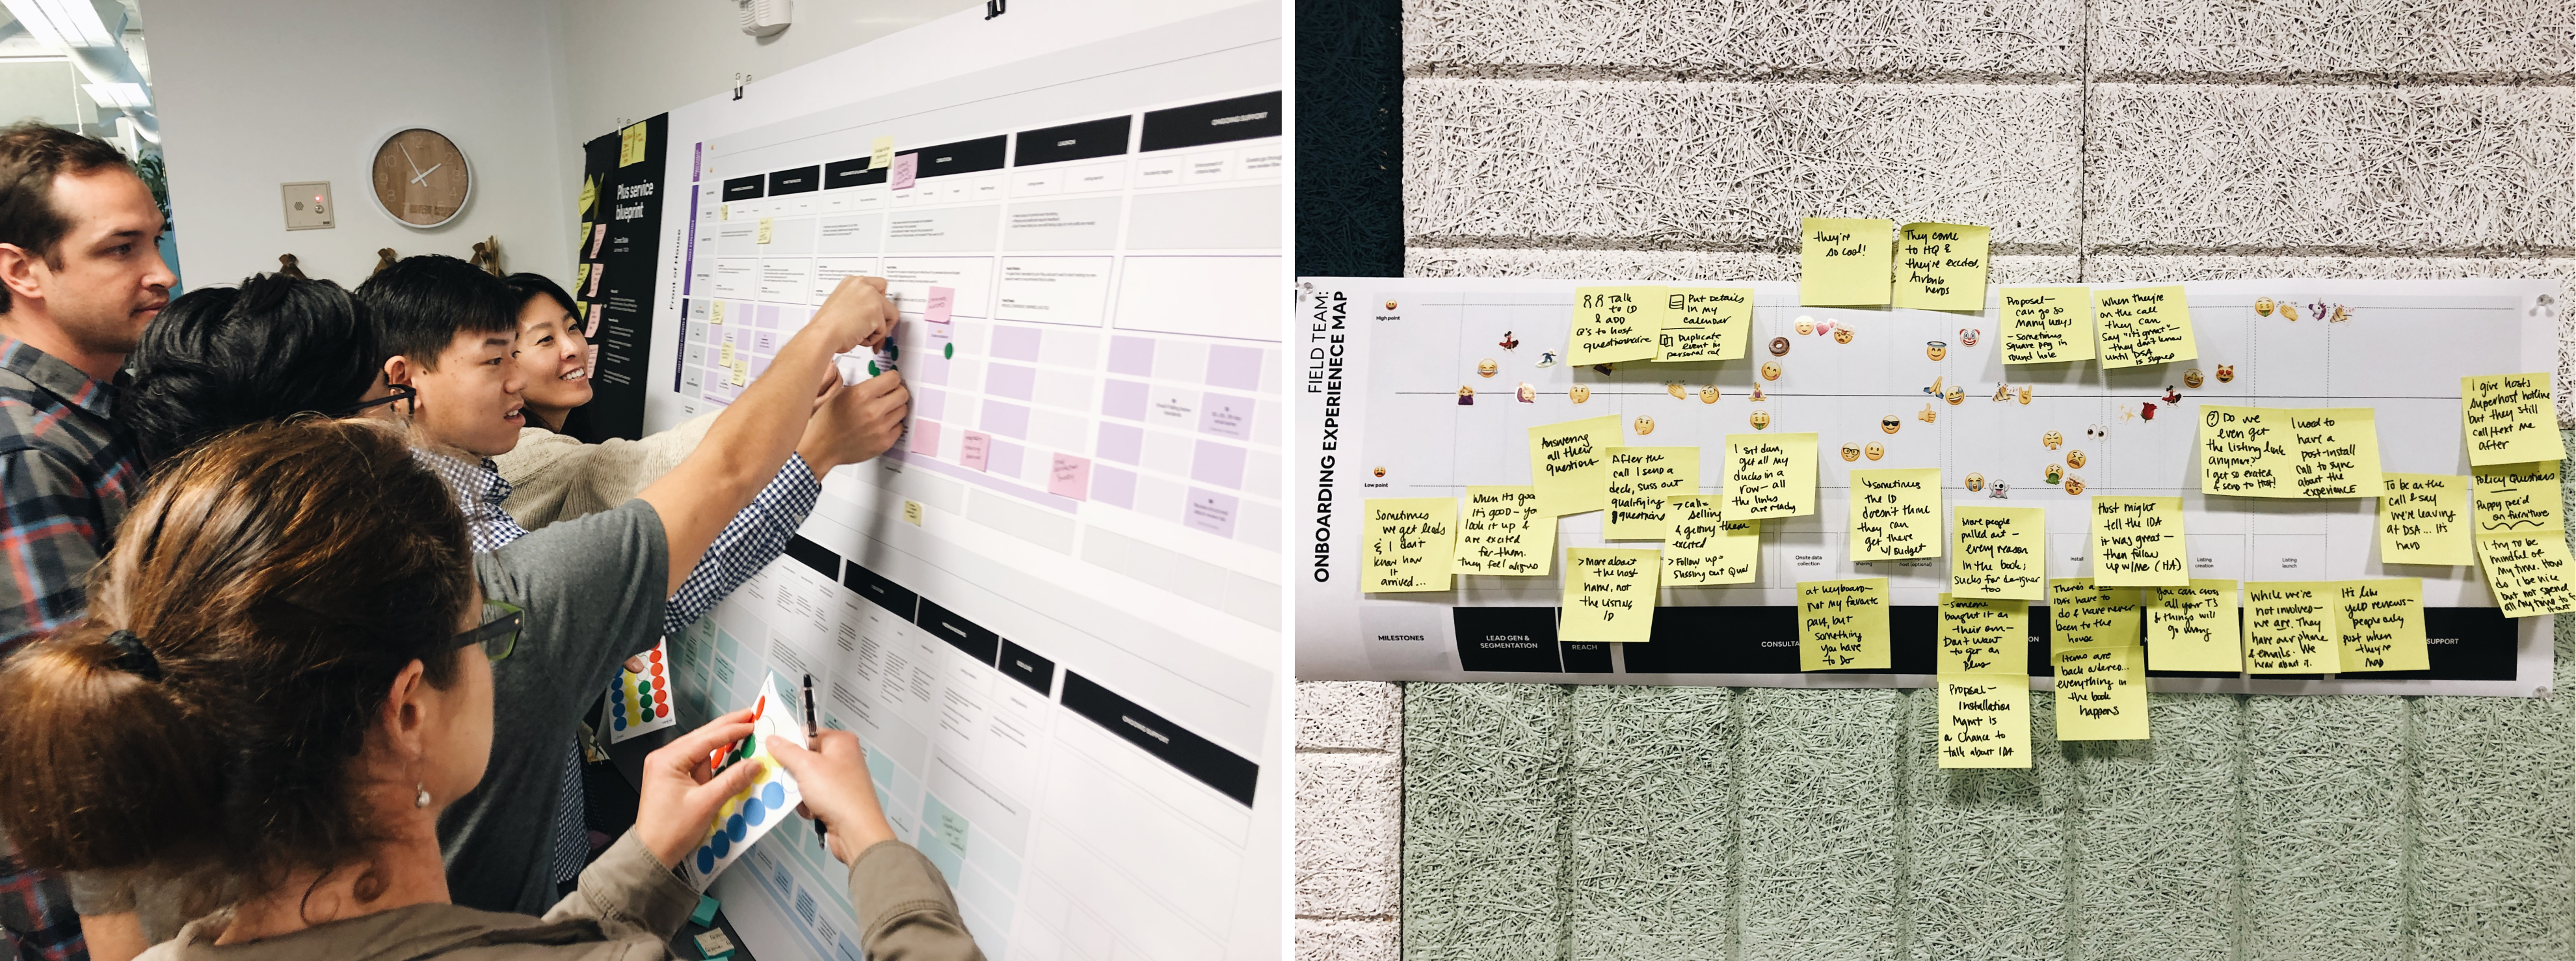 Design team sprint using dot voting and sticky notes